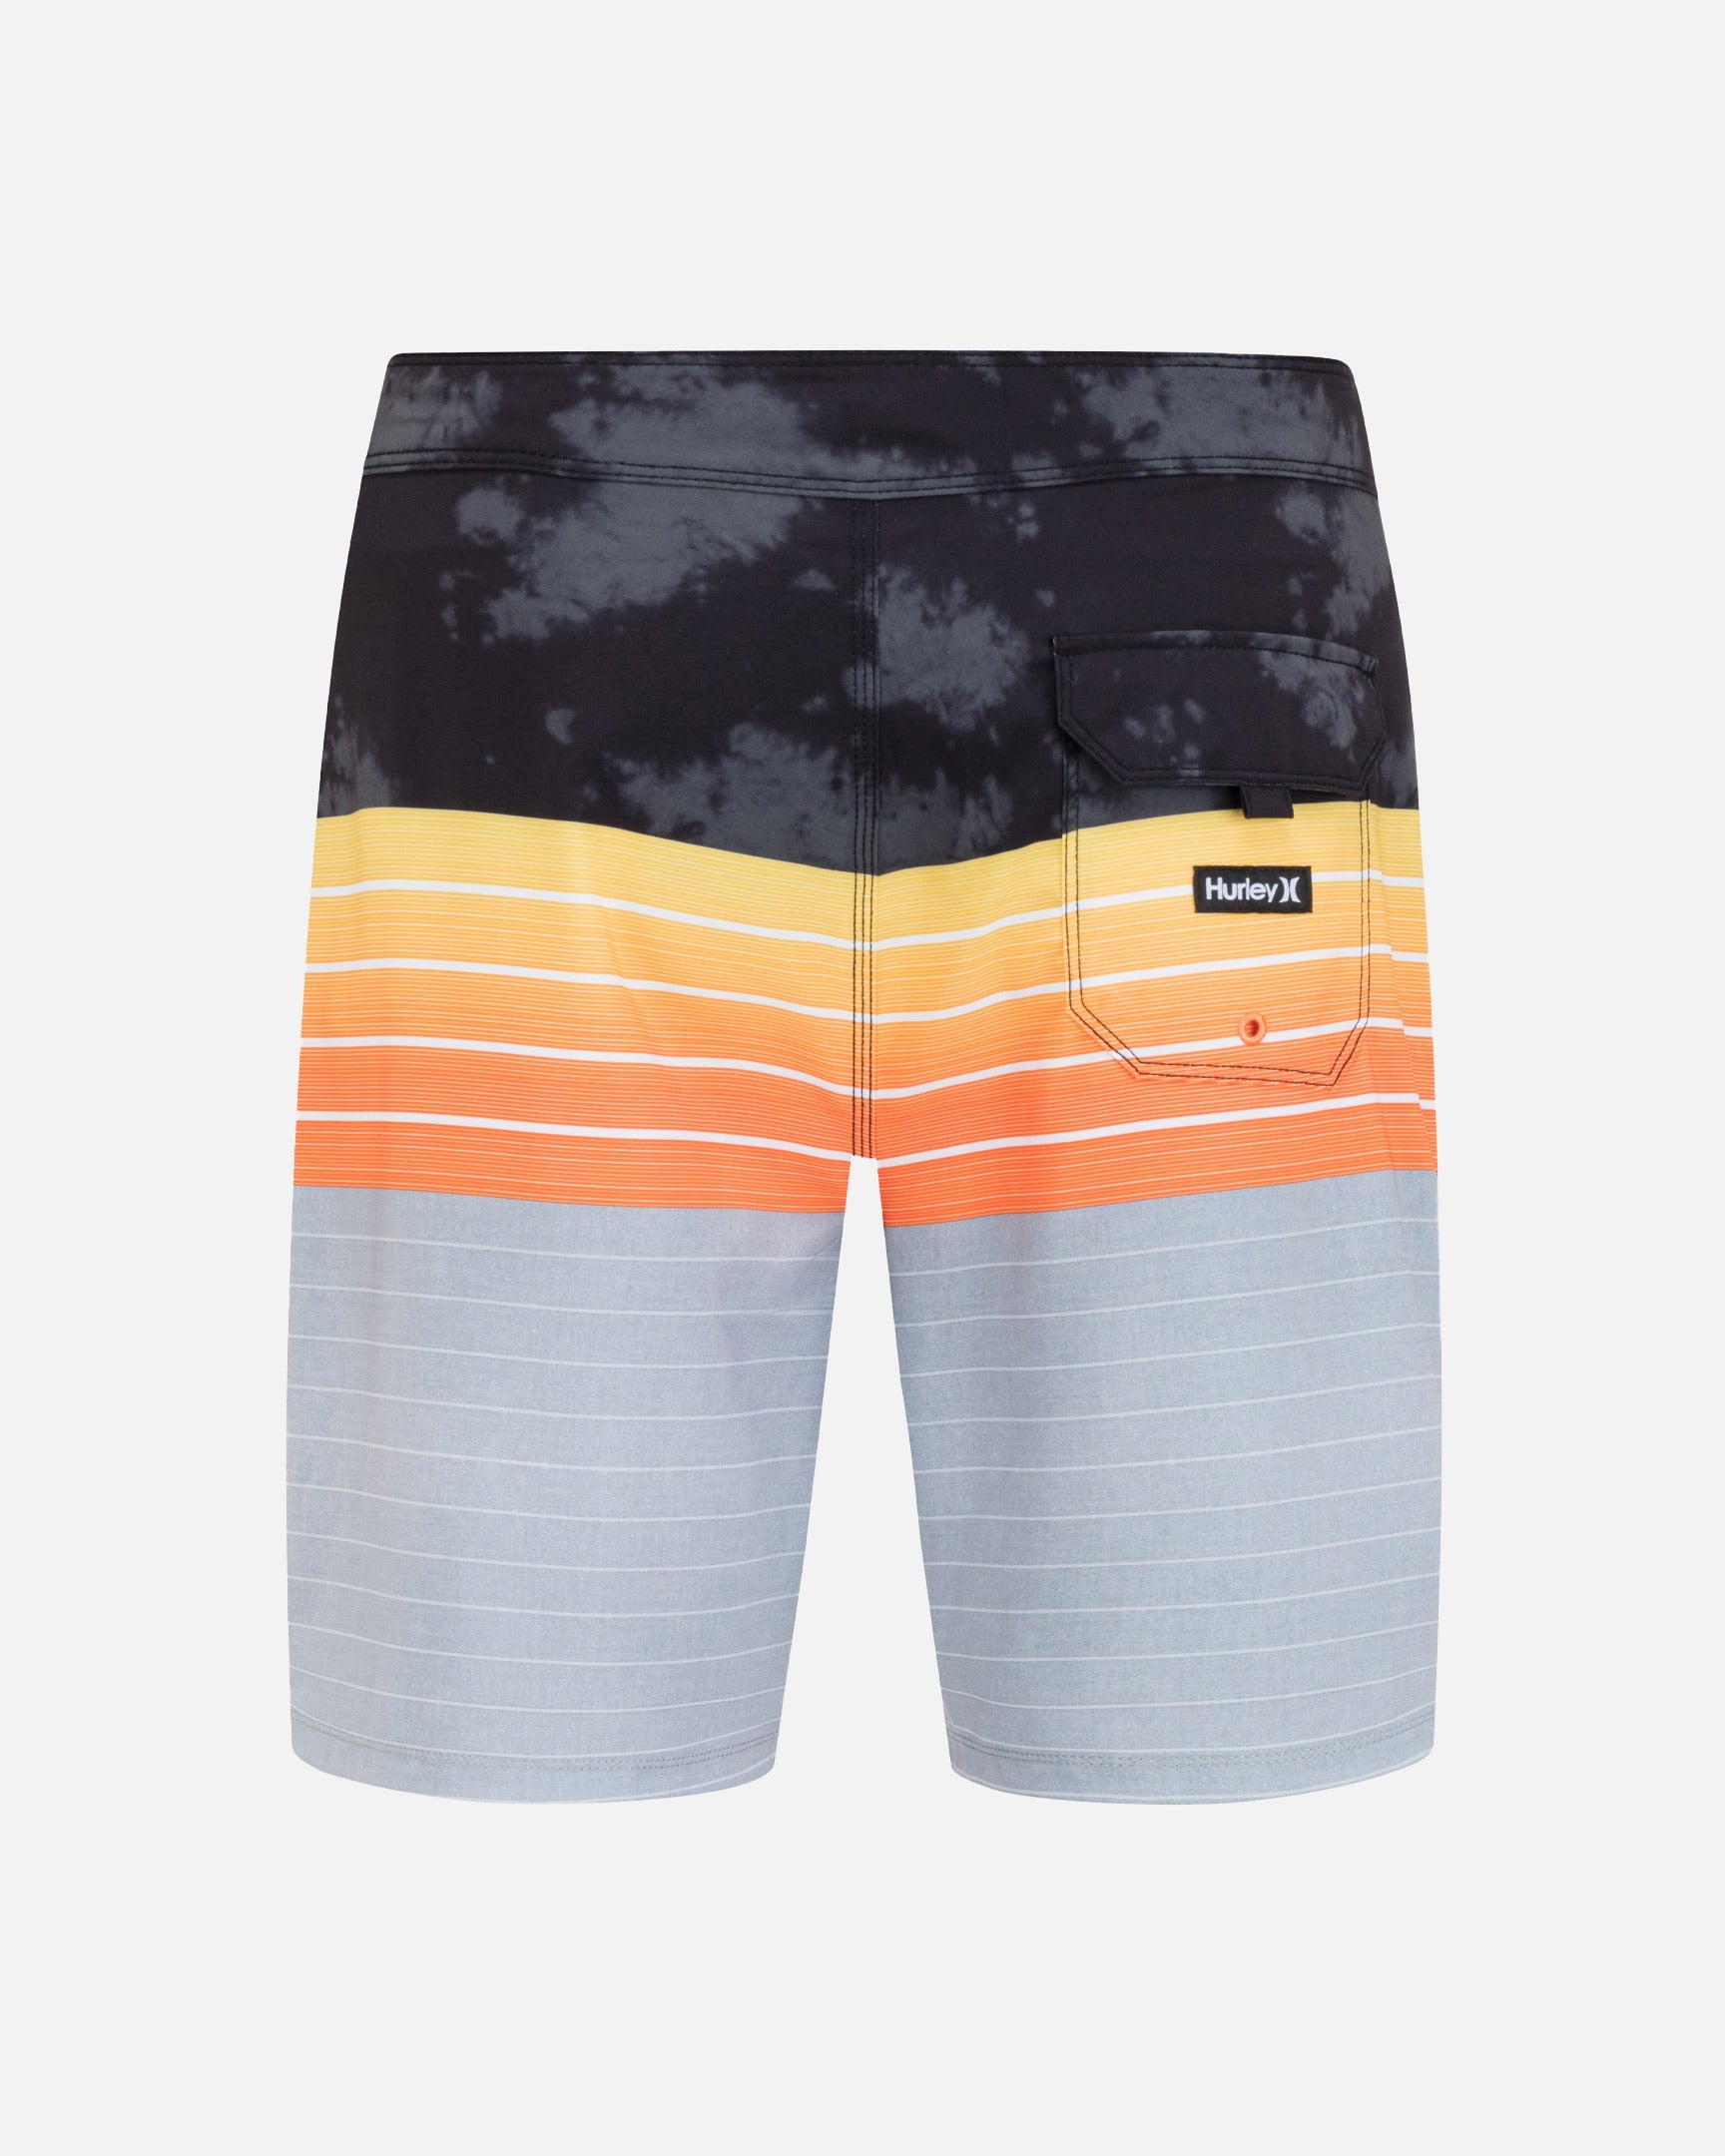 Hurley SS21 Boardshorts Preview - Boardsport SOURCE